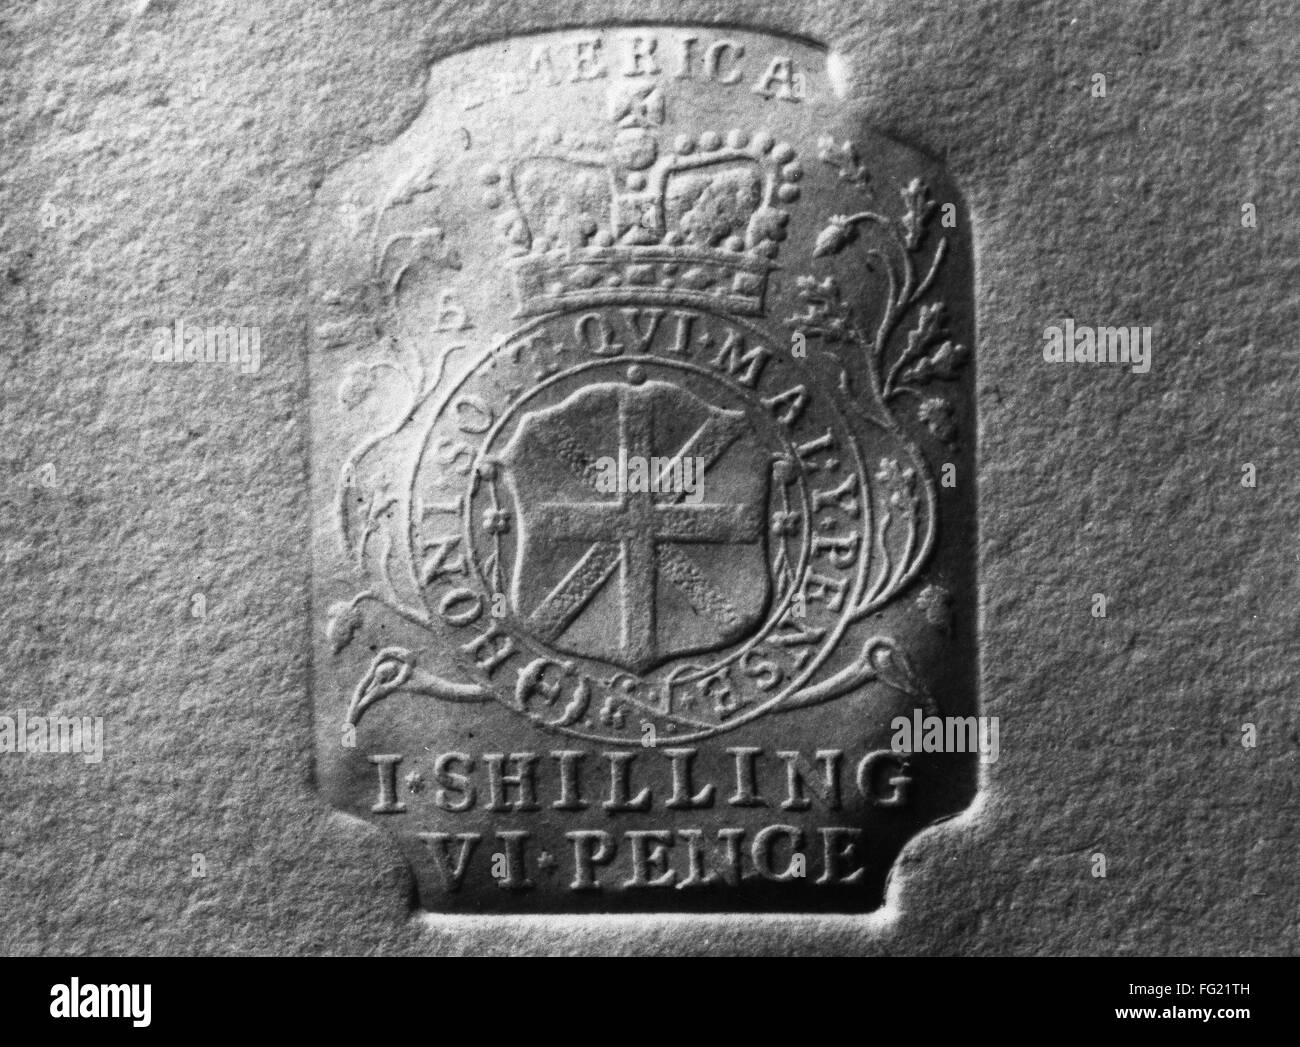 COLONIAL TAX STAMP. /nTax stamp issued by British government for use on papers in the American colonies. Stock Photo